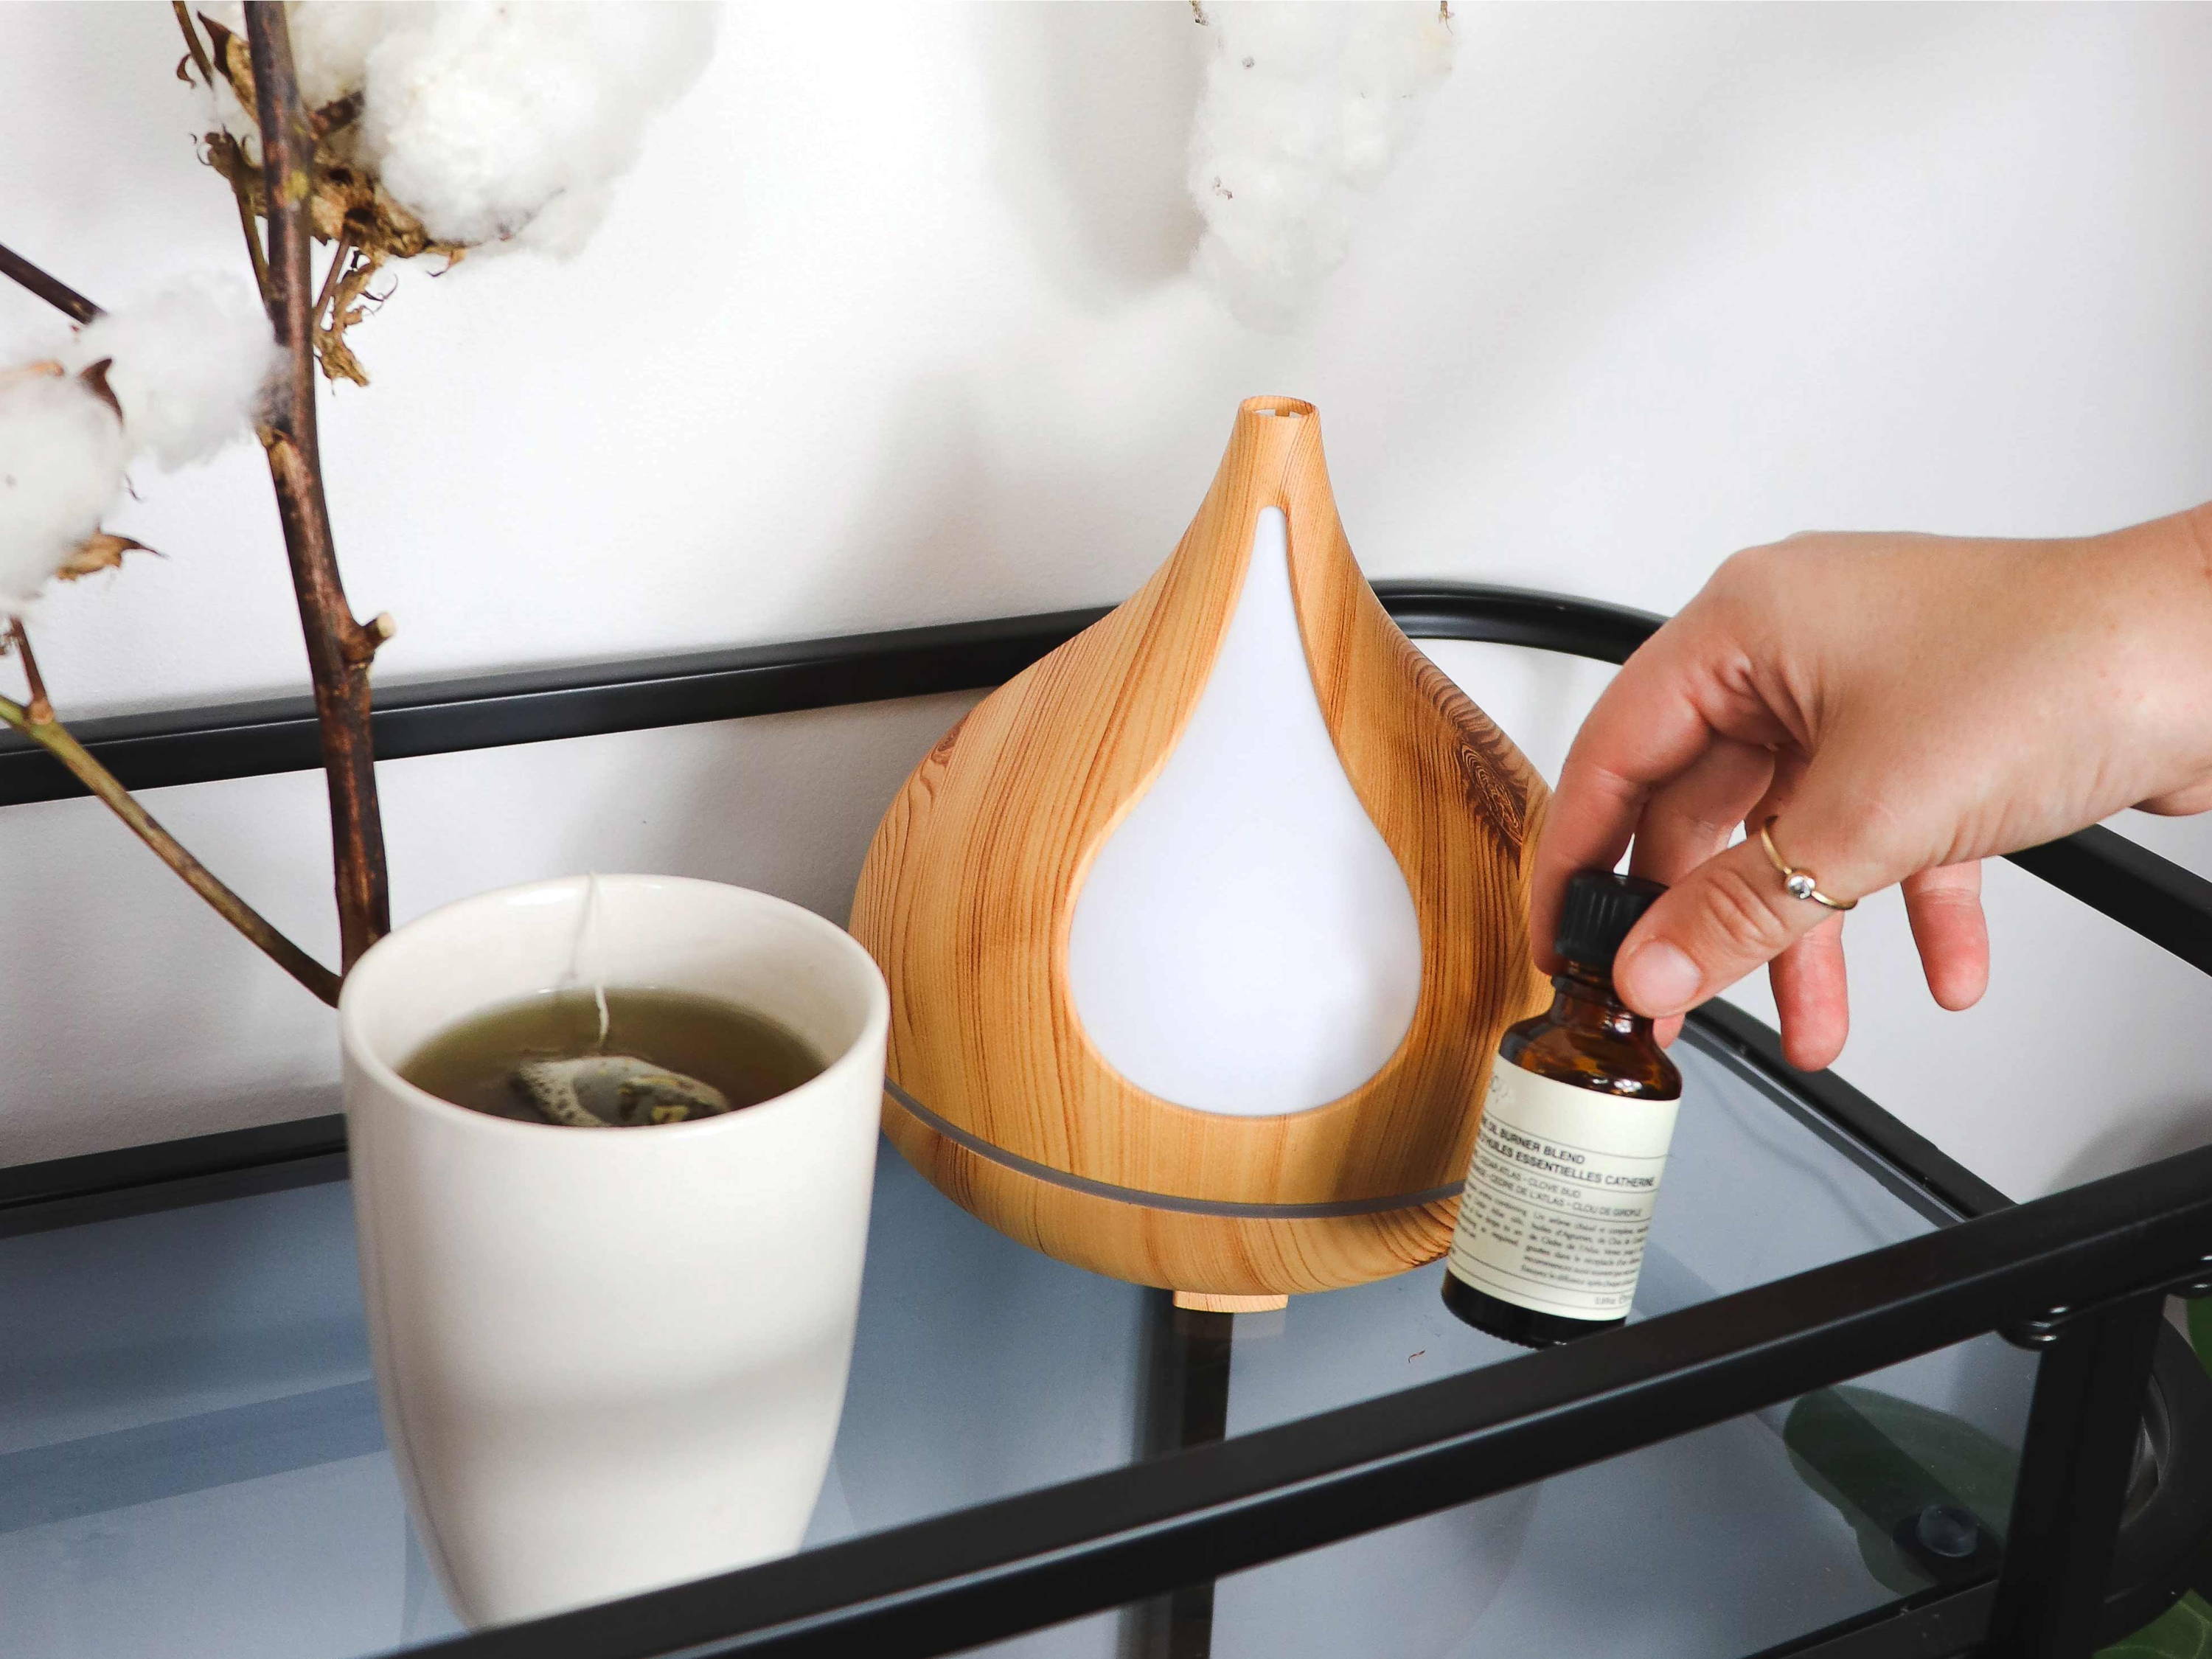 Your Easy Guide to Essential Oil Diffusers: Nebulizing or Ultrasonic? Heat  or Evaporative? Let's compare. - Greenopedia